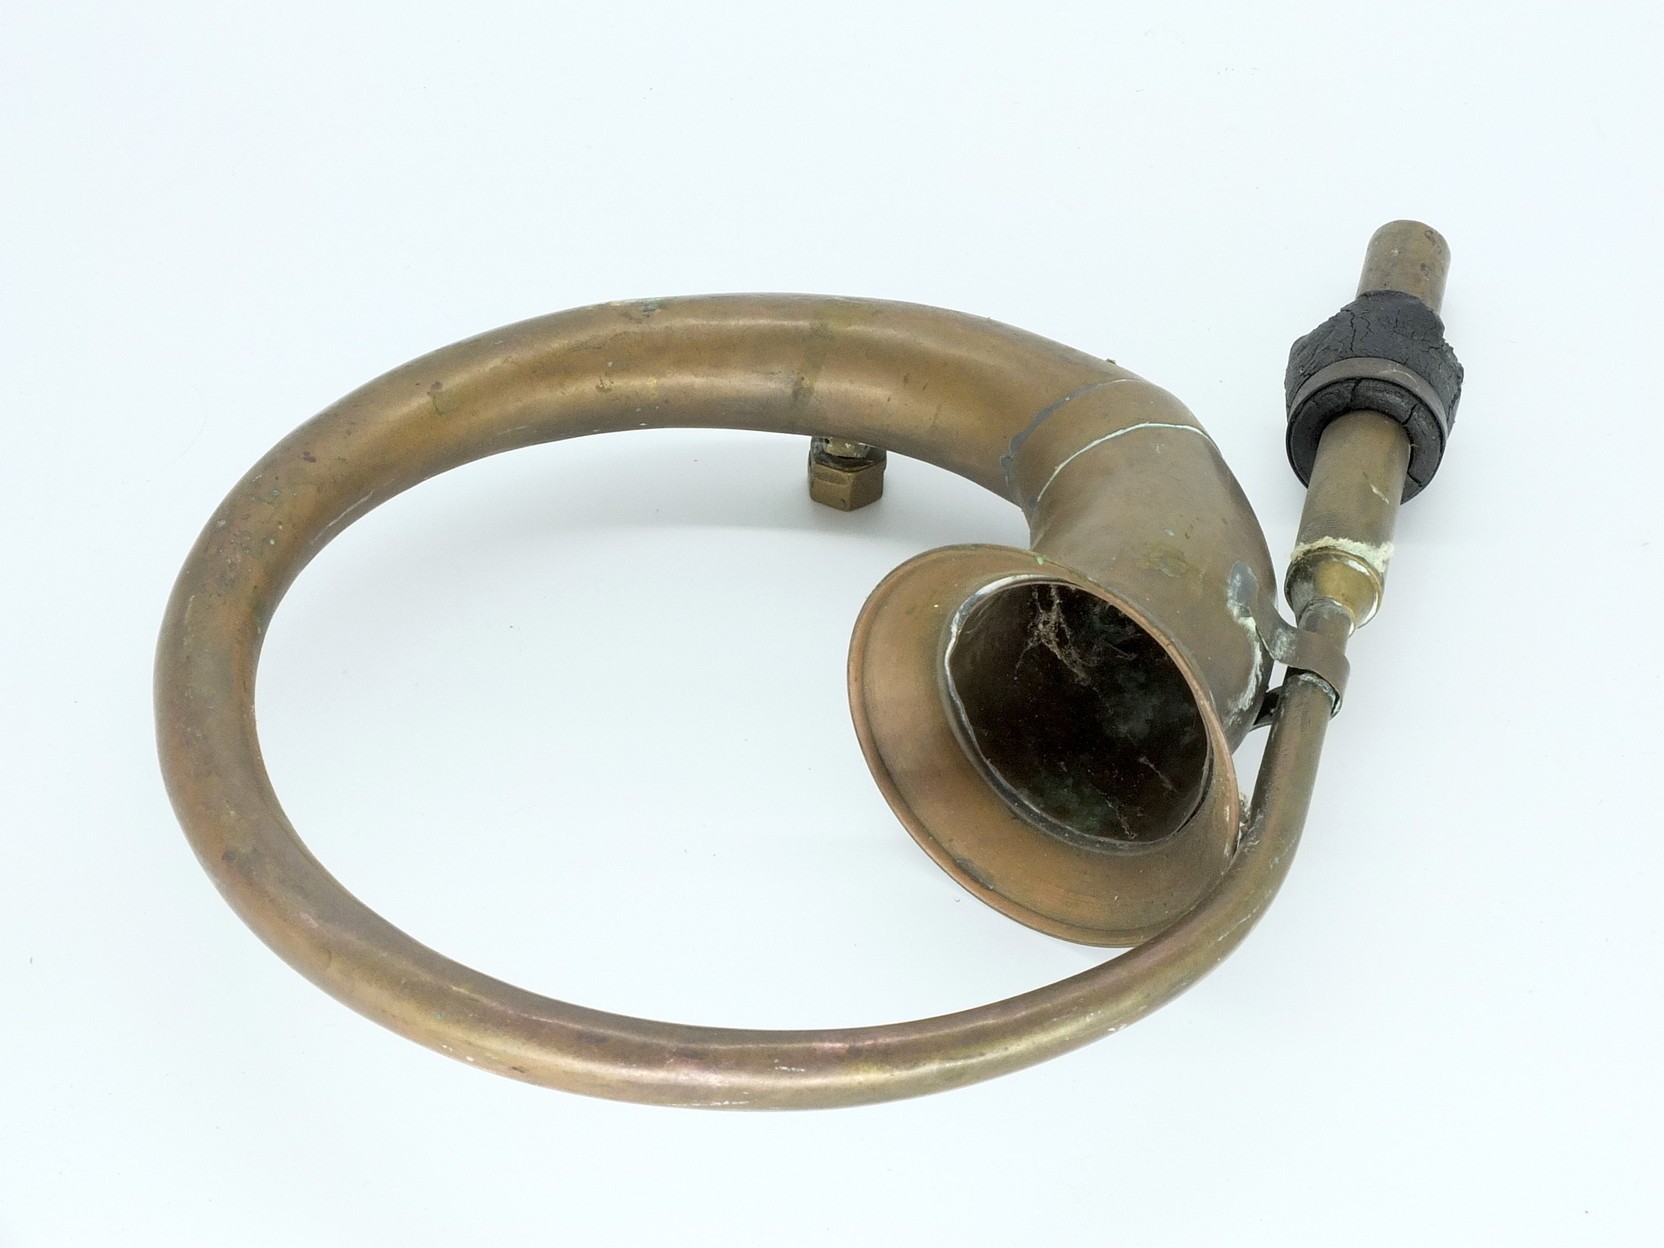 'Vintage Brass Carriage Horn'